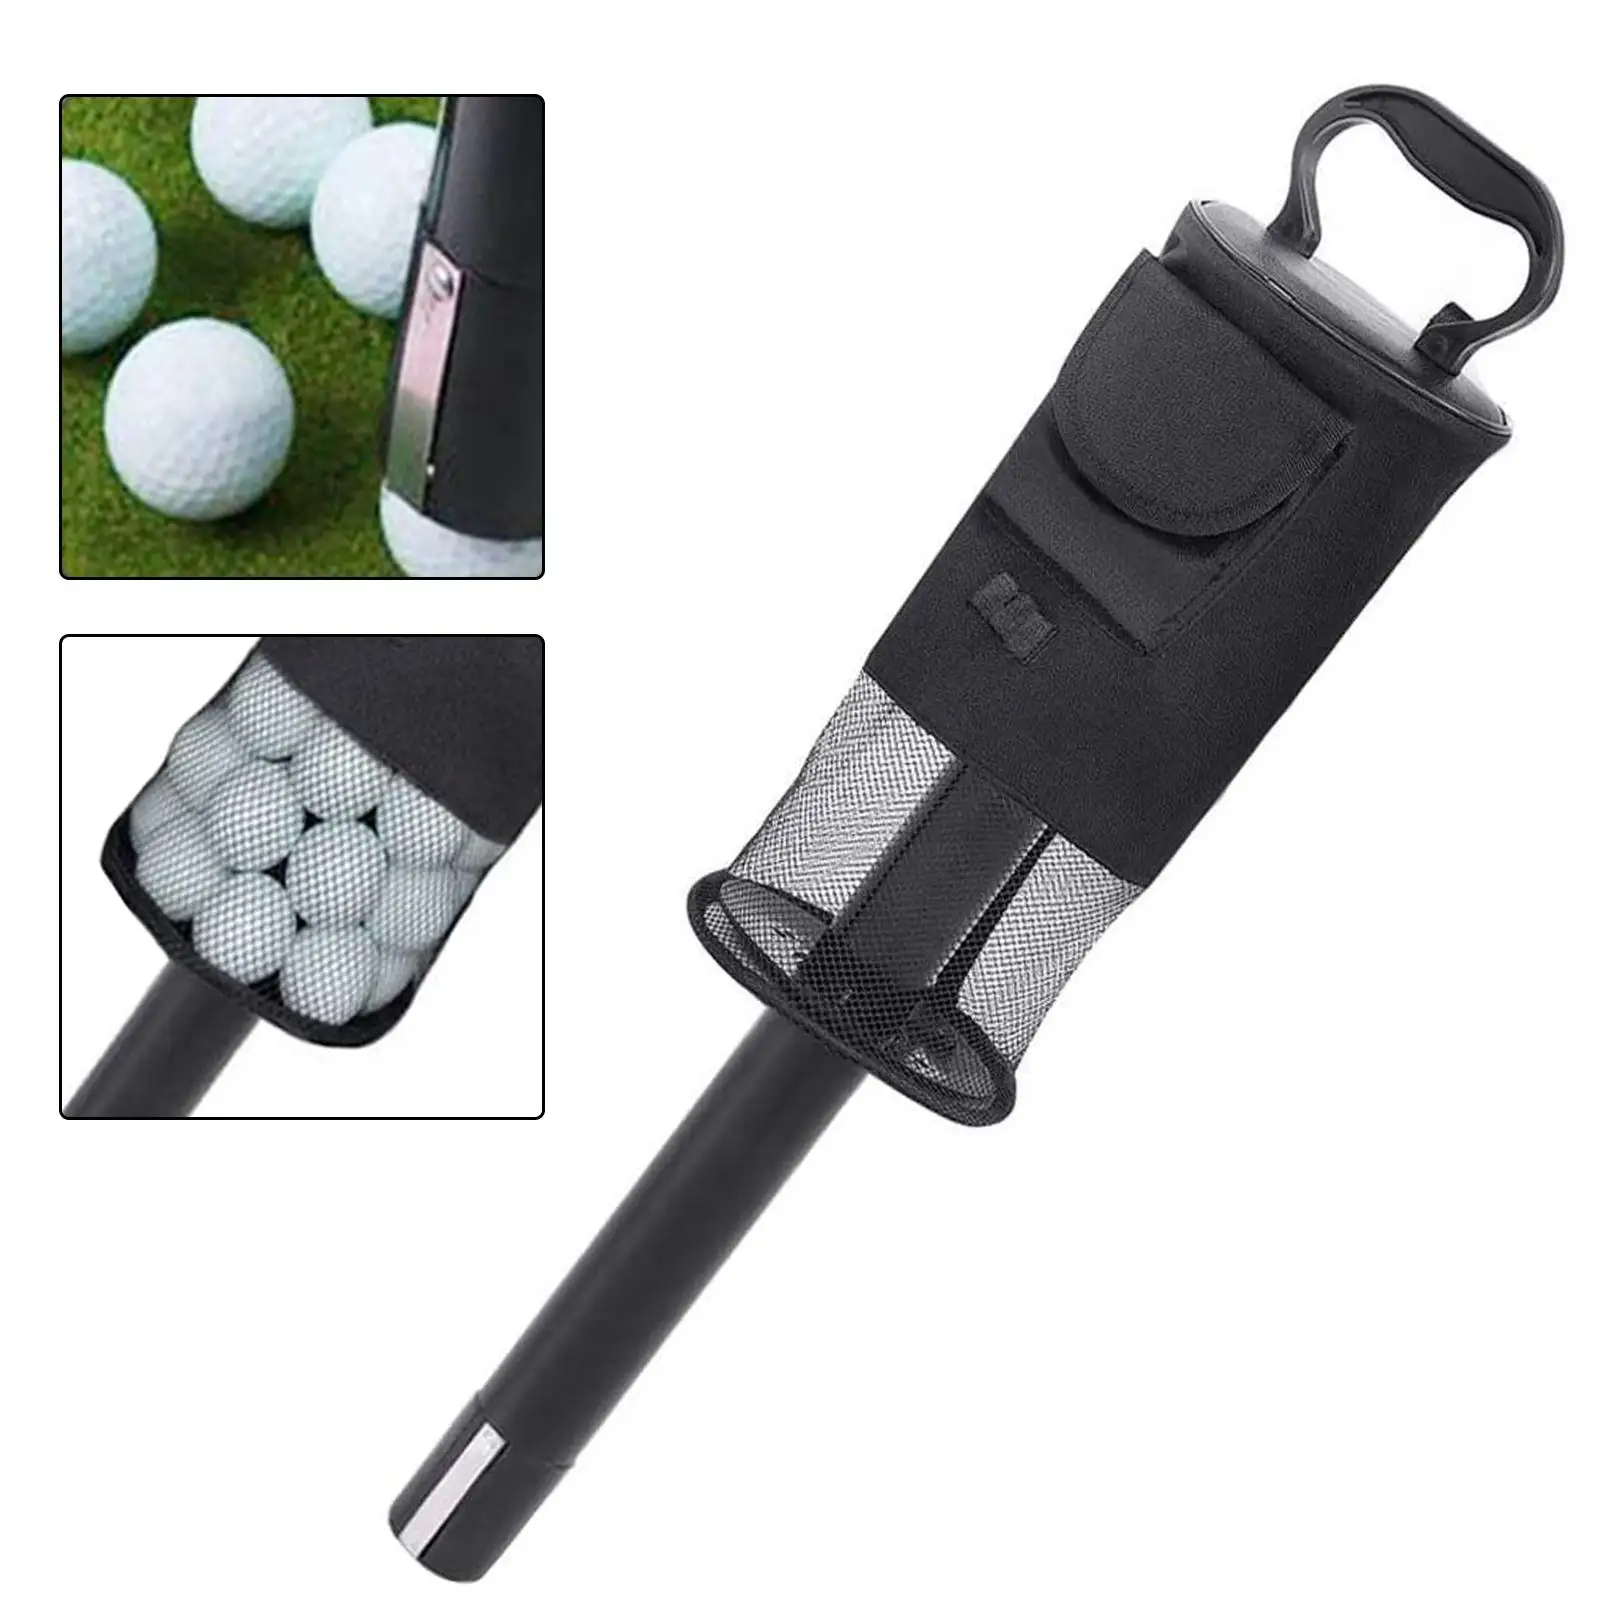 Golf Ball Retriever Portable Hold up to 70 Balls Training Storage Ball Picker Golf Shag Bags with Pocket and Tee Holder